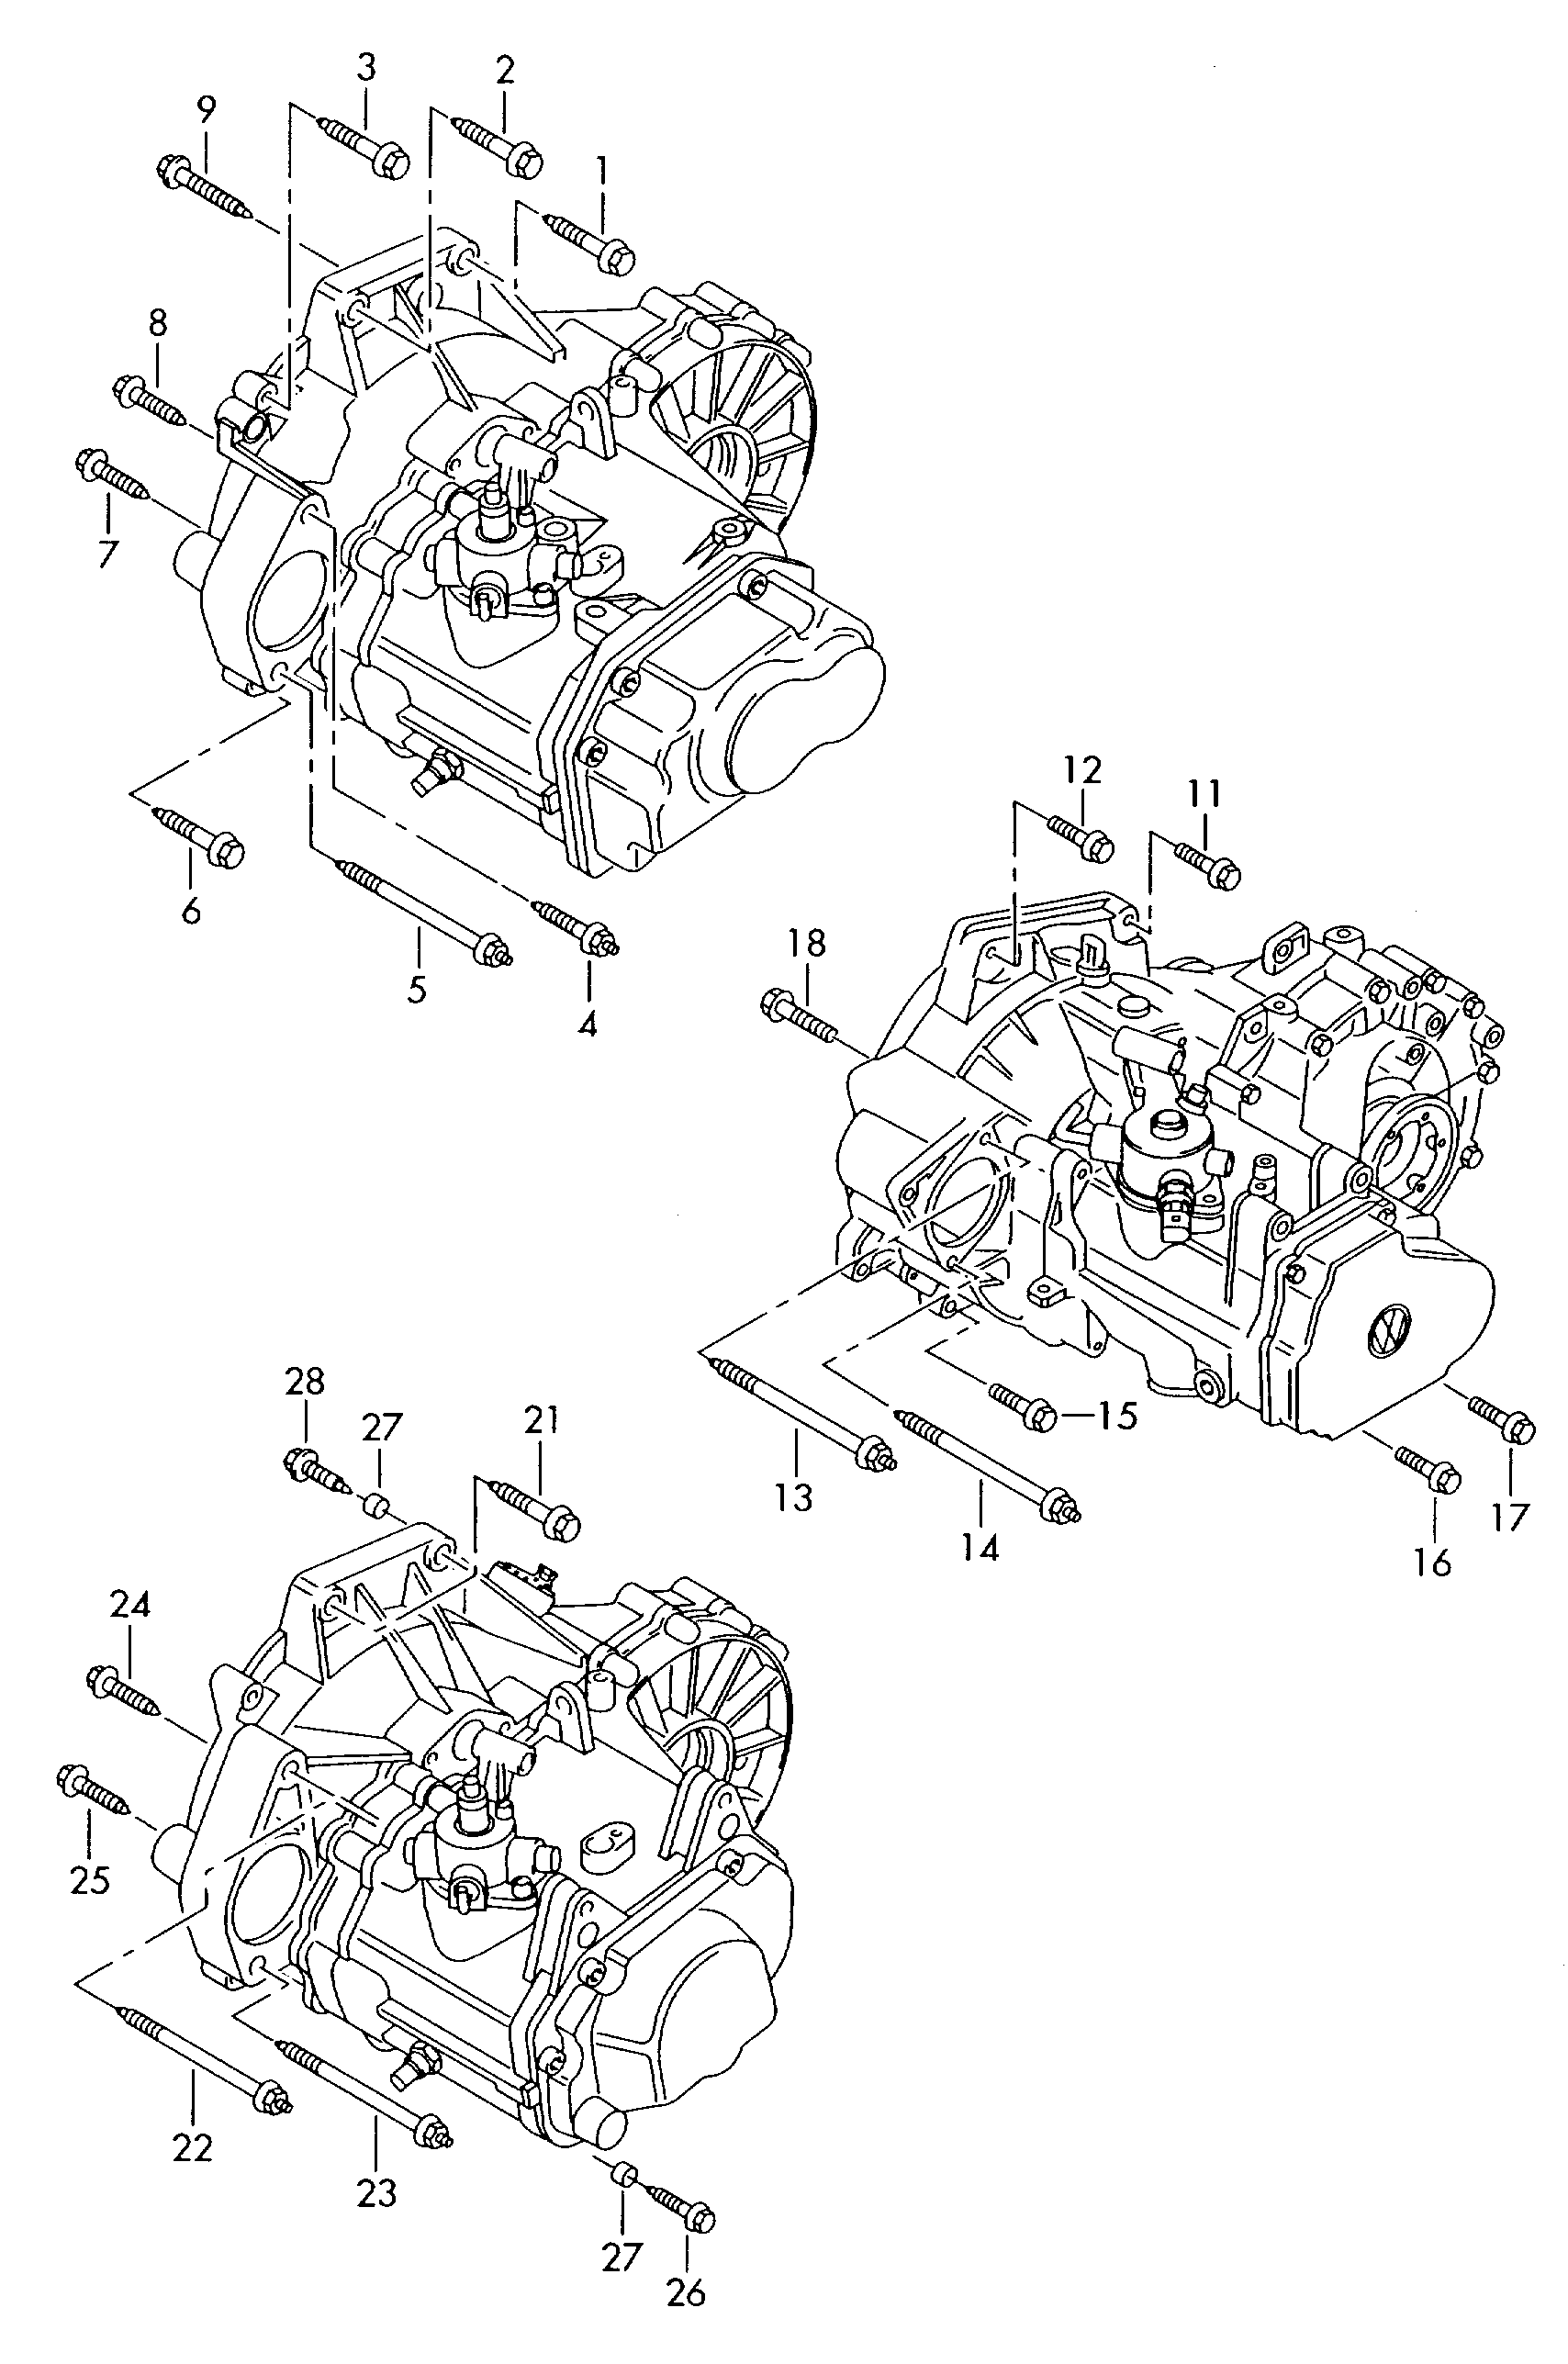 mounting parts for engine and<br>transmission5-speed manual transmission  - Fabia - fab